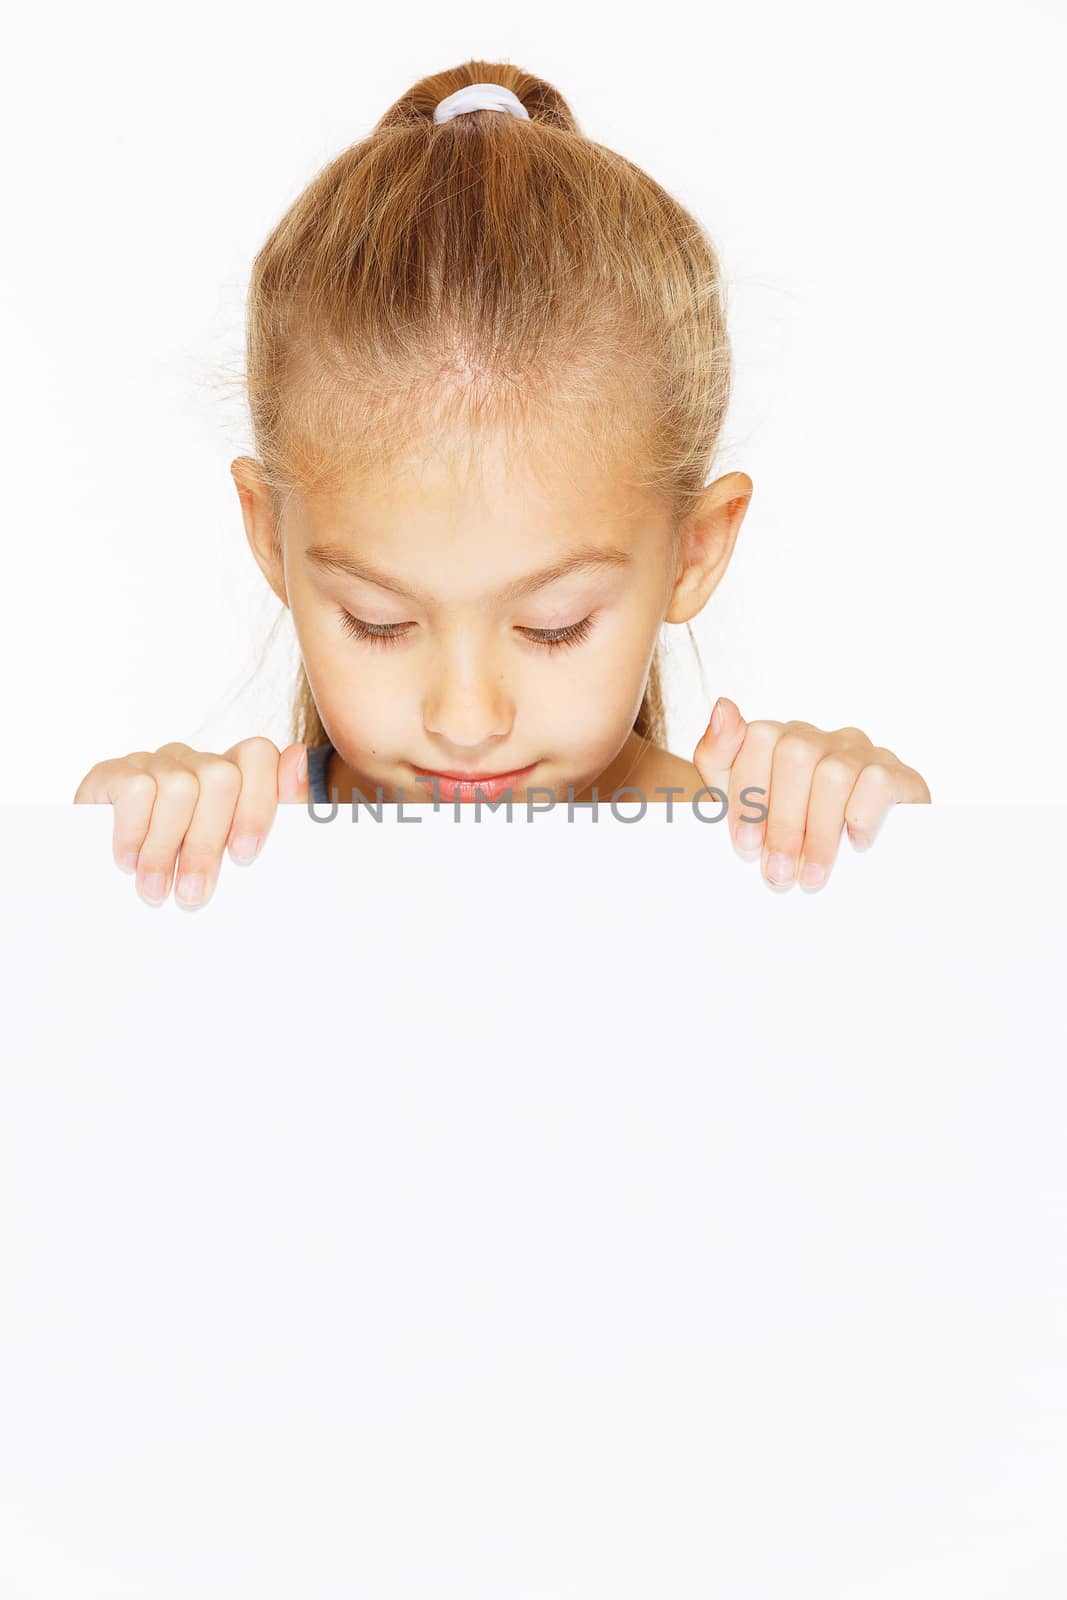 Little girl with blank sign isolated on white